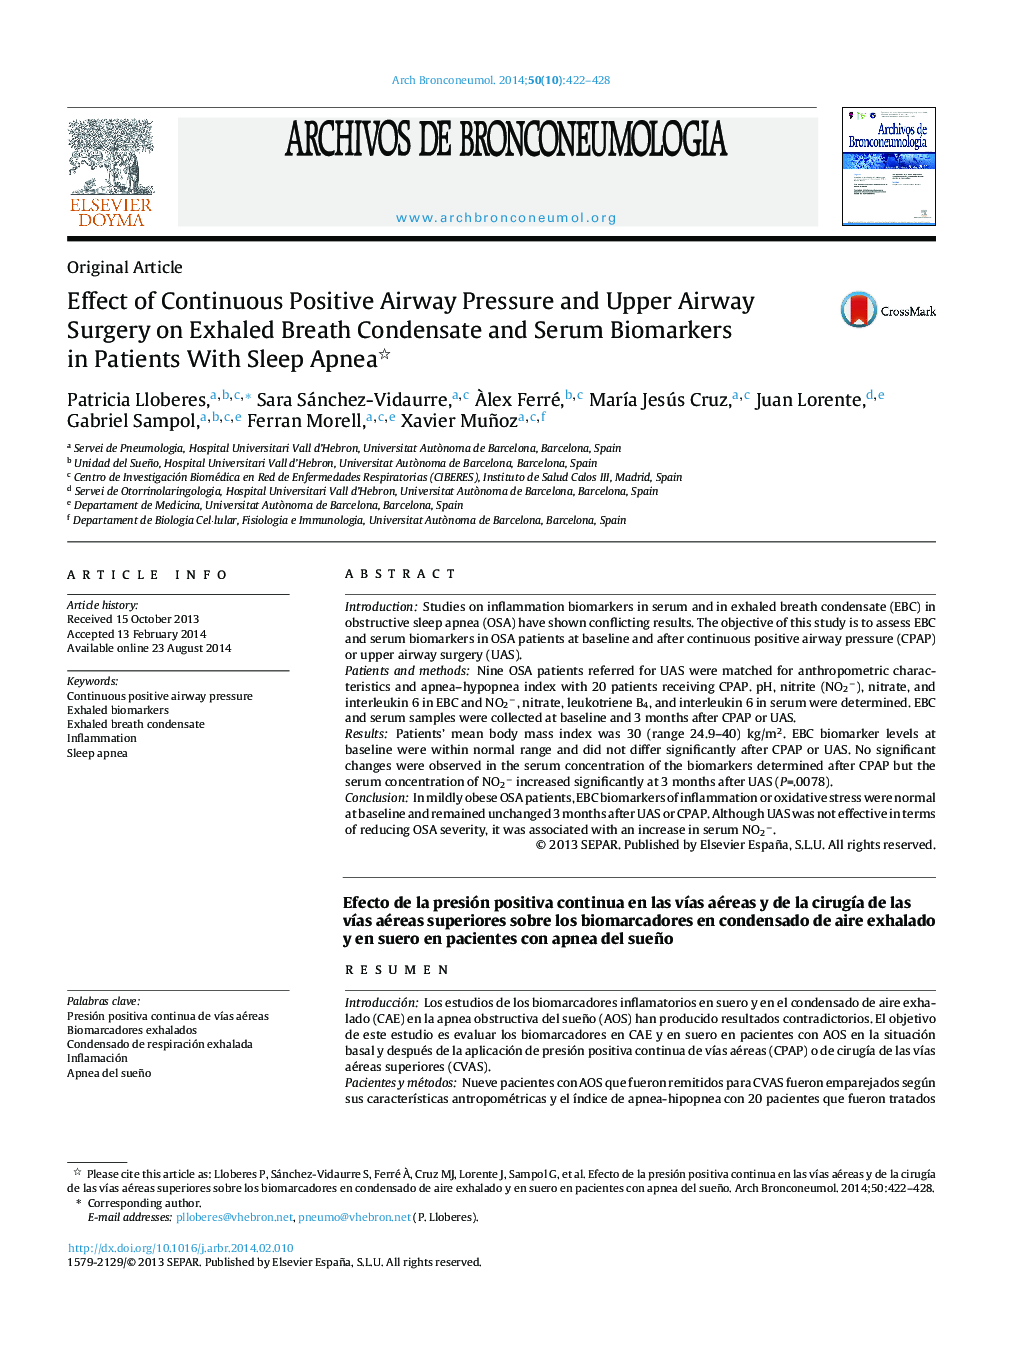 Effect of Continuous Positive Airway Pressure and Upper Airway Surgery on Exhaled Breath Condensate and Serum Biomarkers in Patients With Sleep Apnea 